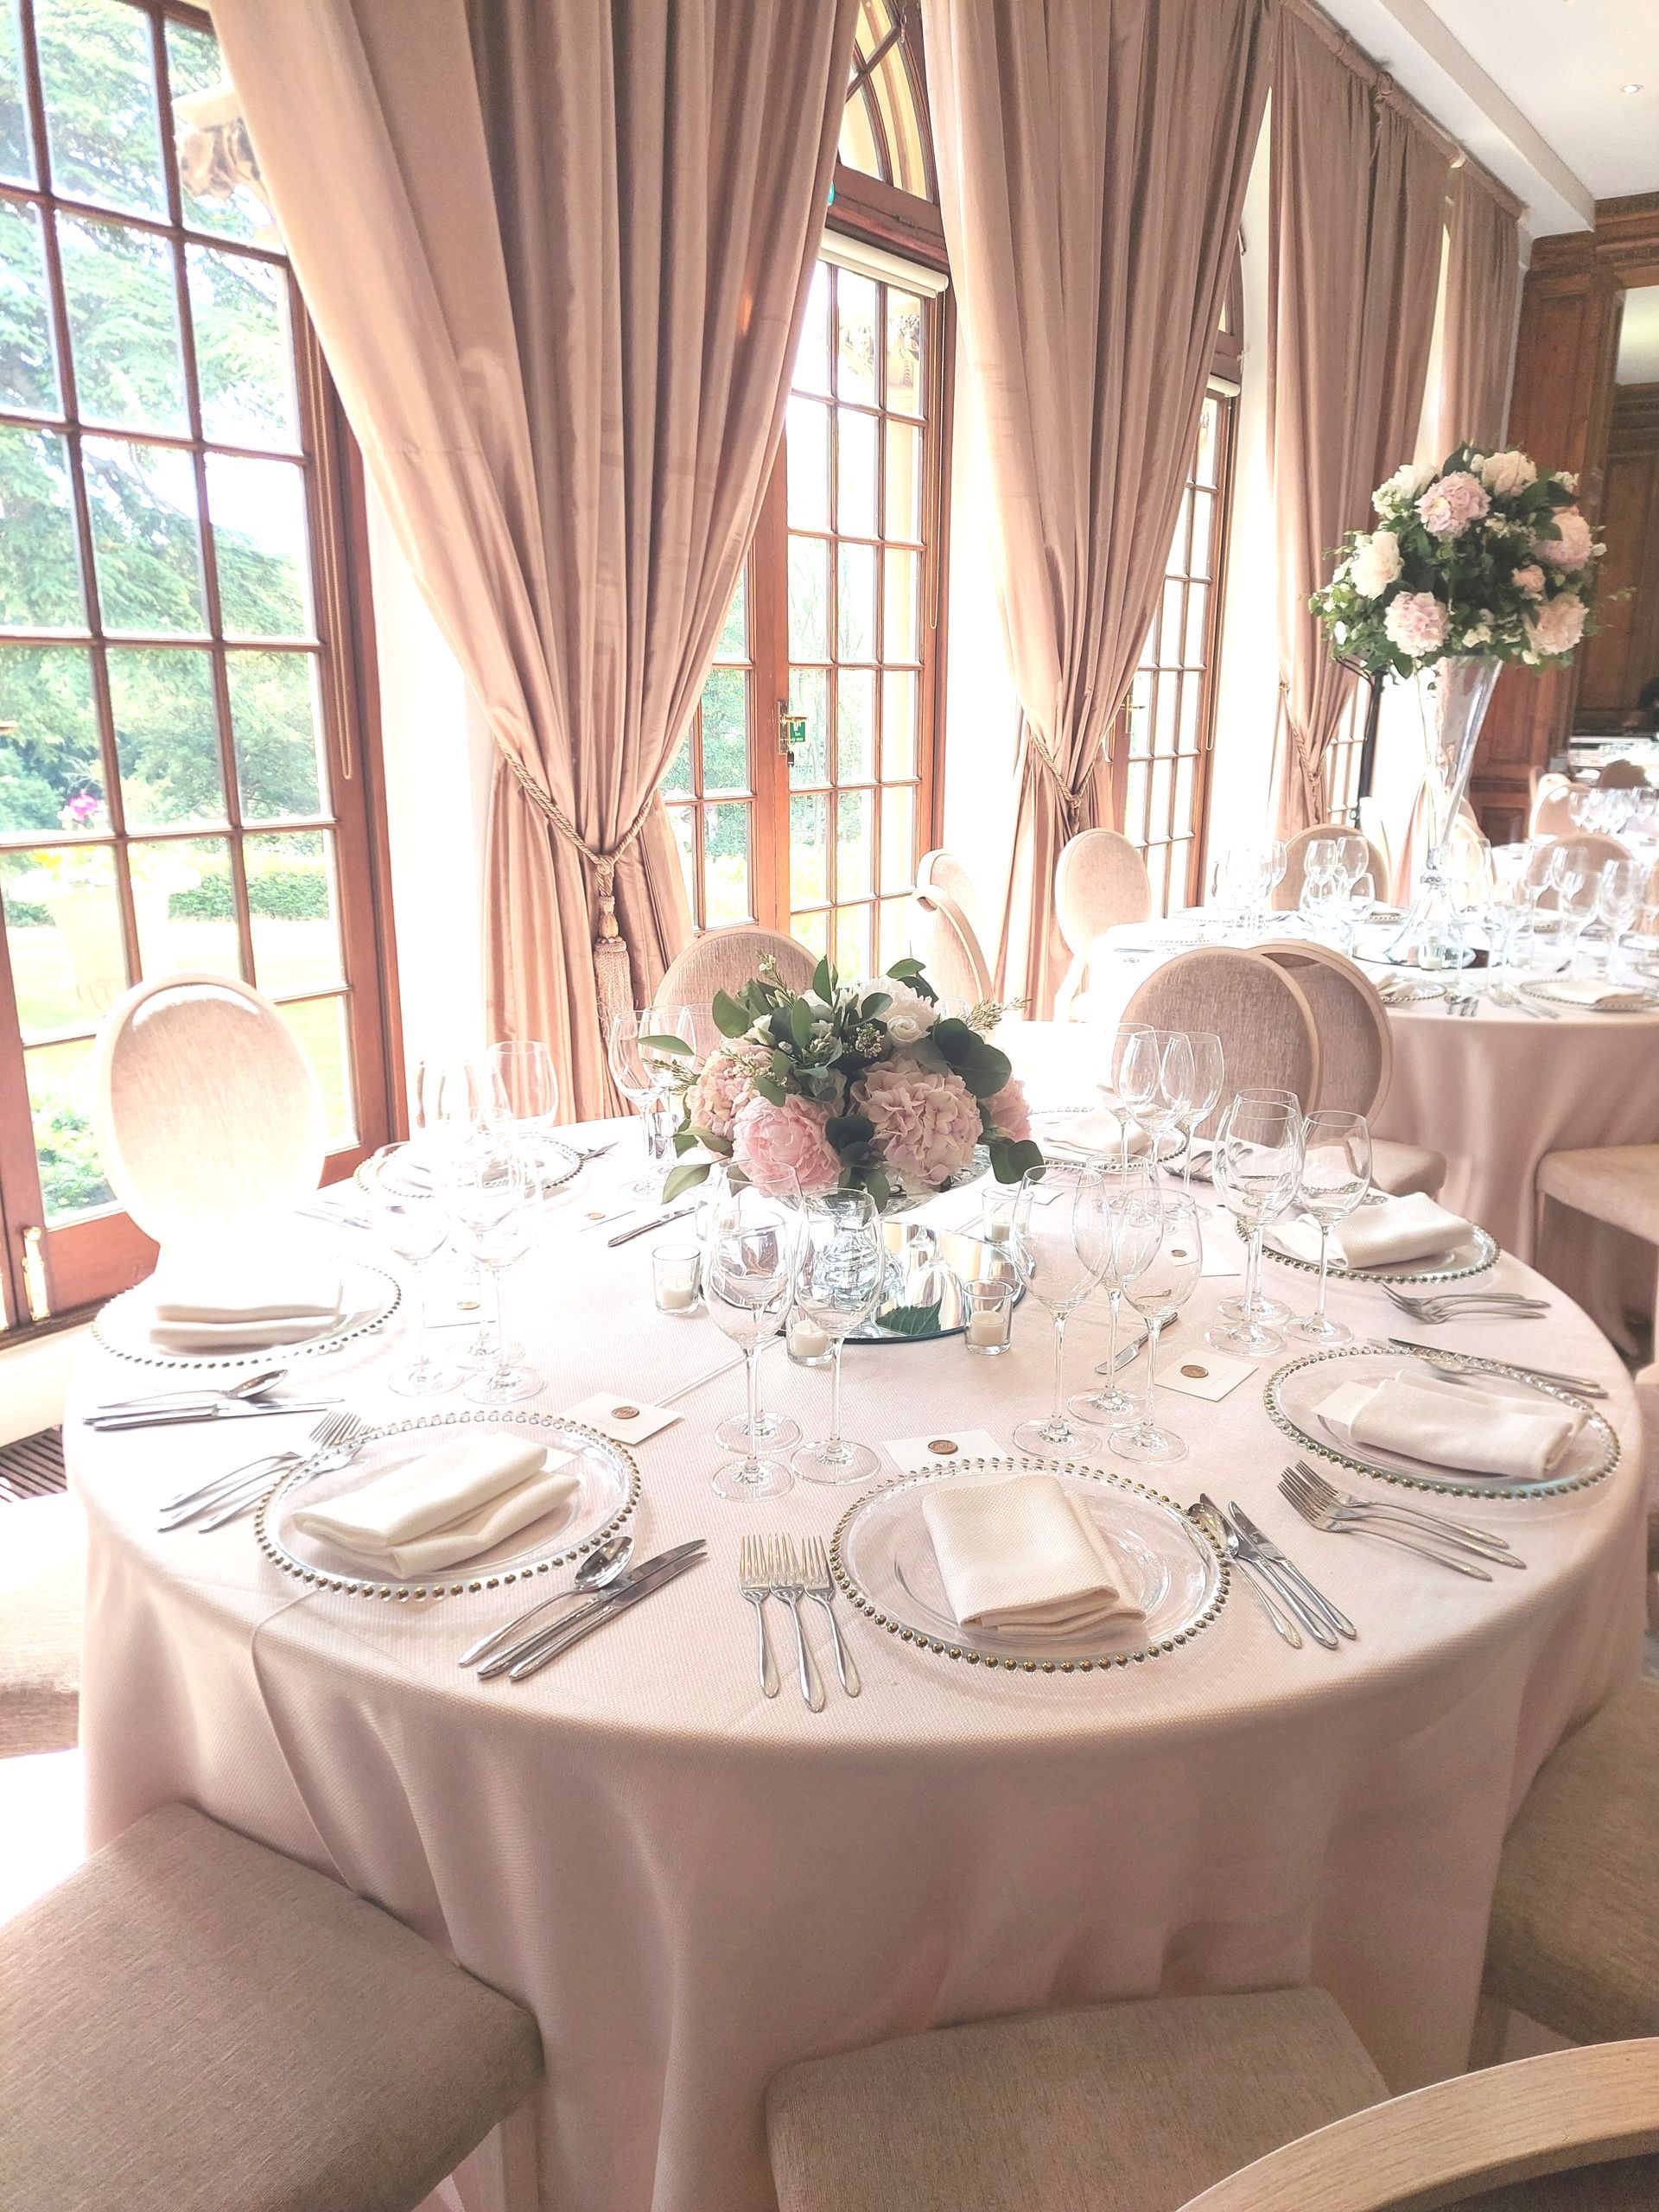 Round wedding table with light pink tablecloth by a window